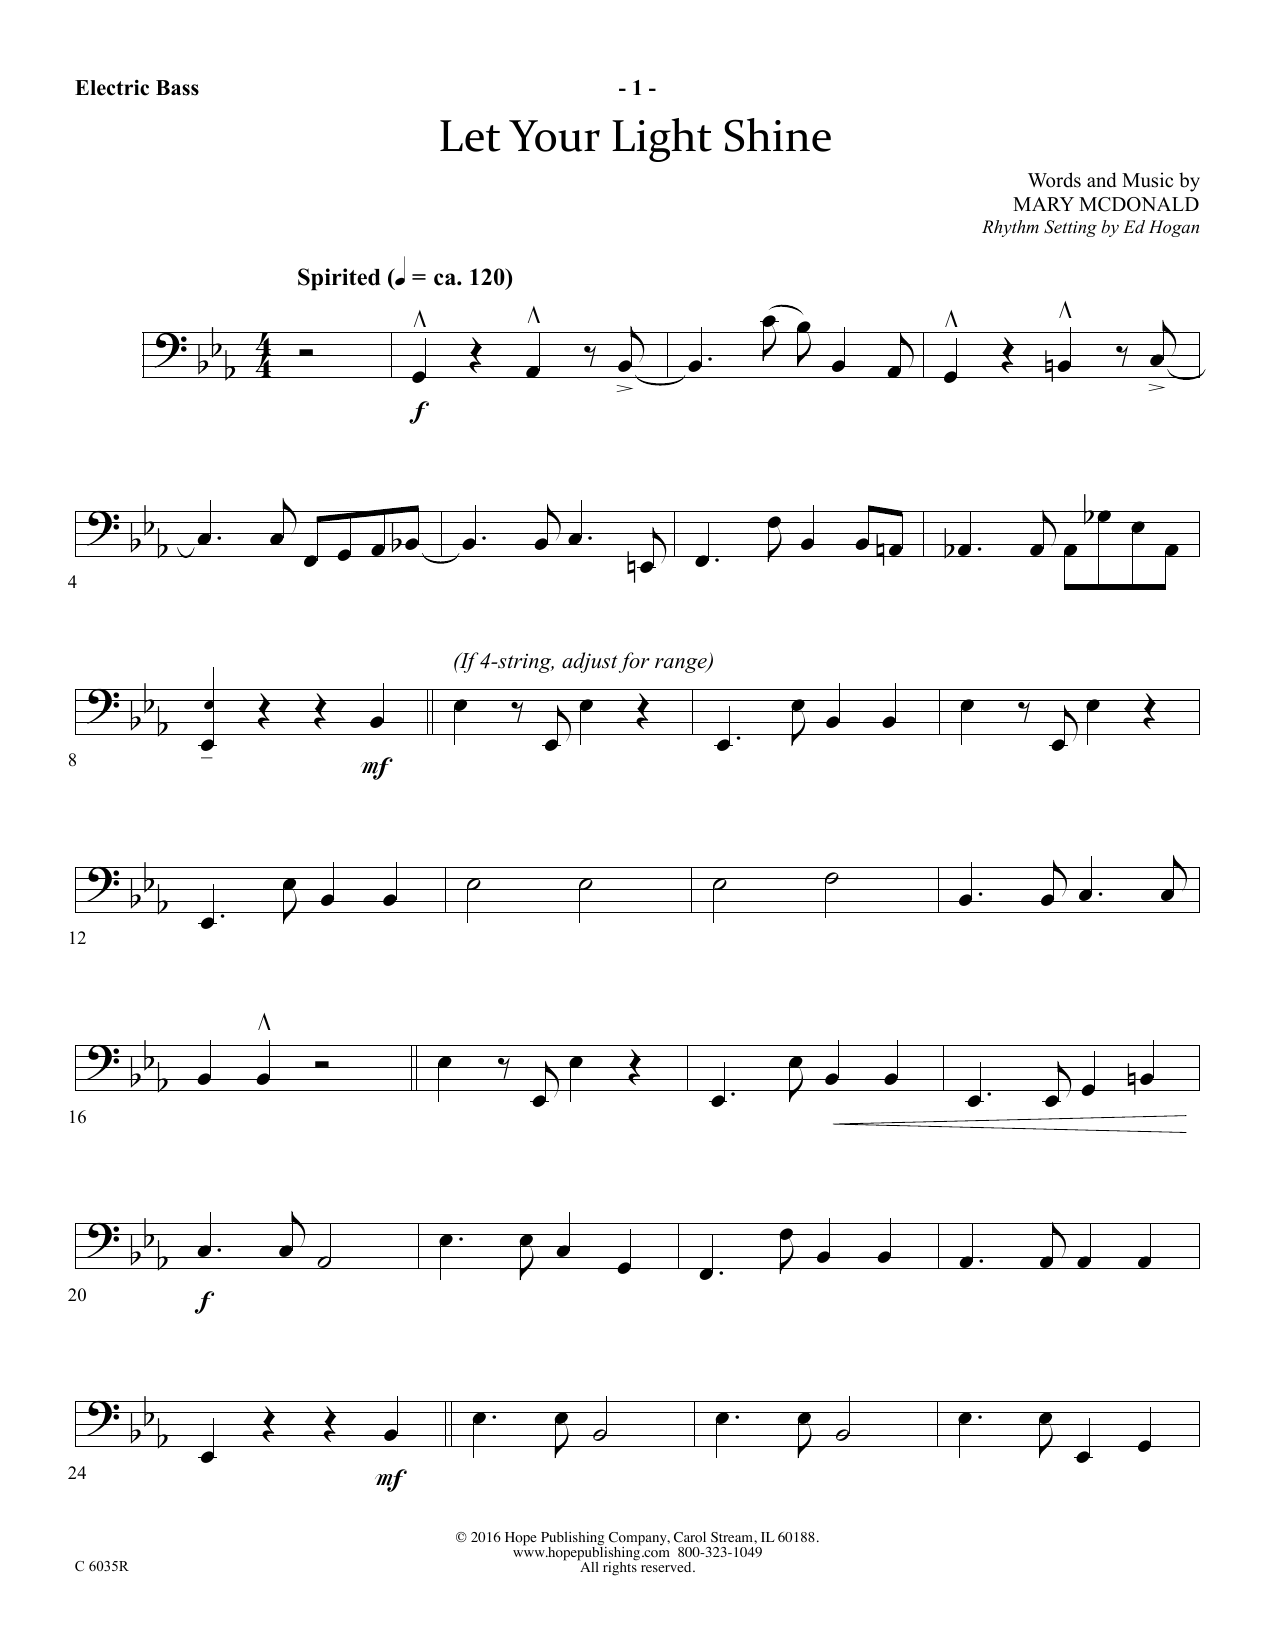 Download Mary McDonald Let Your Light Shine - Electric Bass Sheet Music